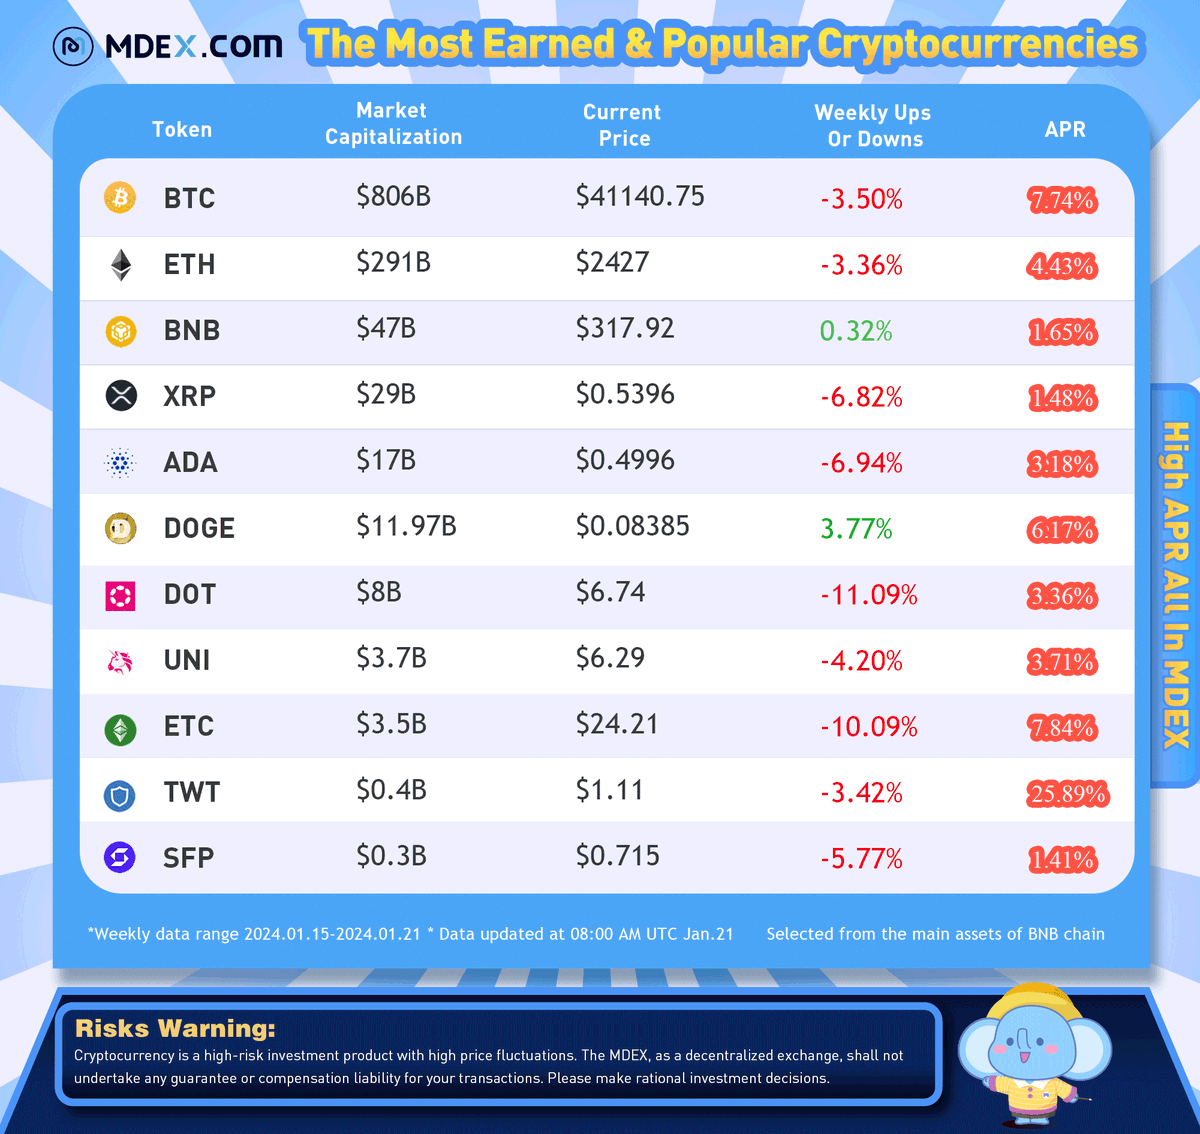 📈Check out the 'Most Earned & Popular Major #Cryptocurrencies Ranking' with the highest #APR on MDEX.com on #BNBChain from Jan 15-Jan 21. 💜Stay tuned to @Mdextech for more updates on HIGH APR #Cryptocurrencies. #BTC #ETH #BNB #XRP $tip #USTC